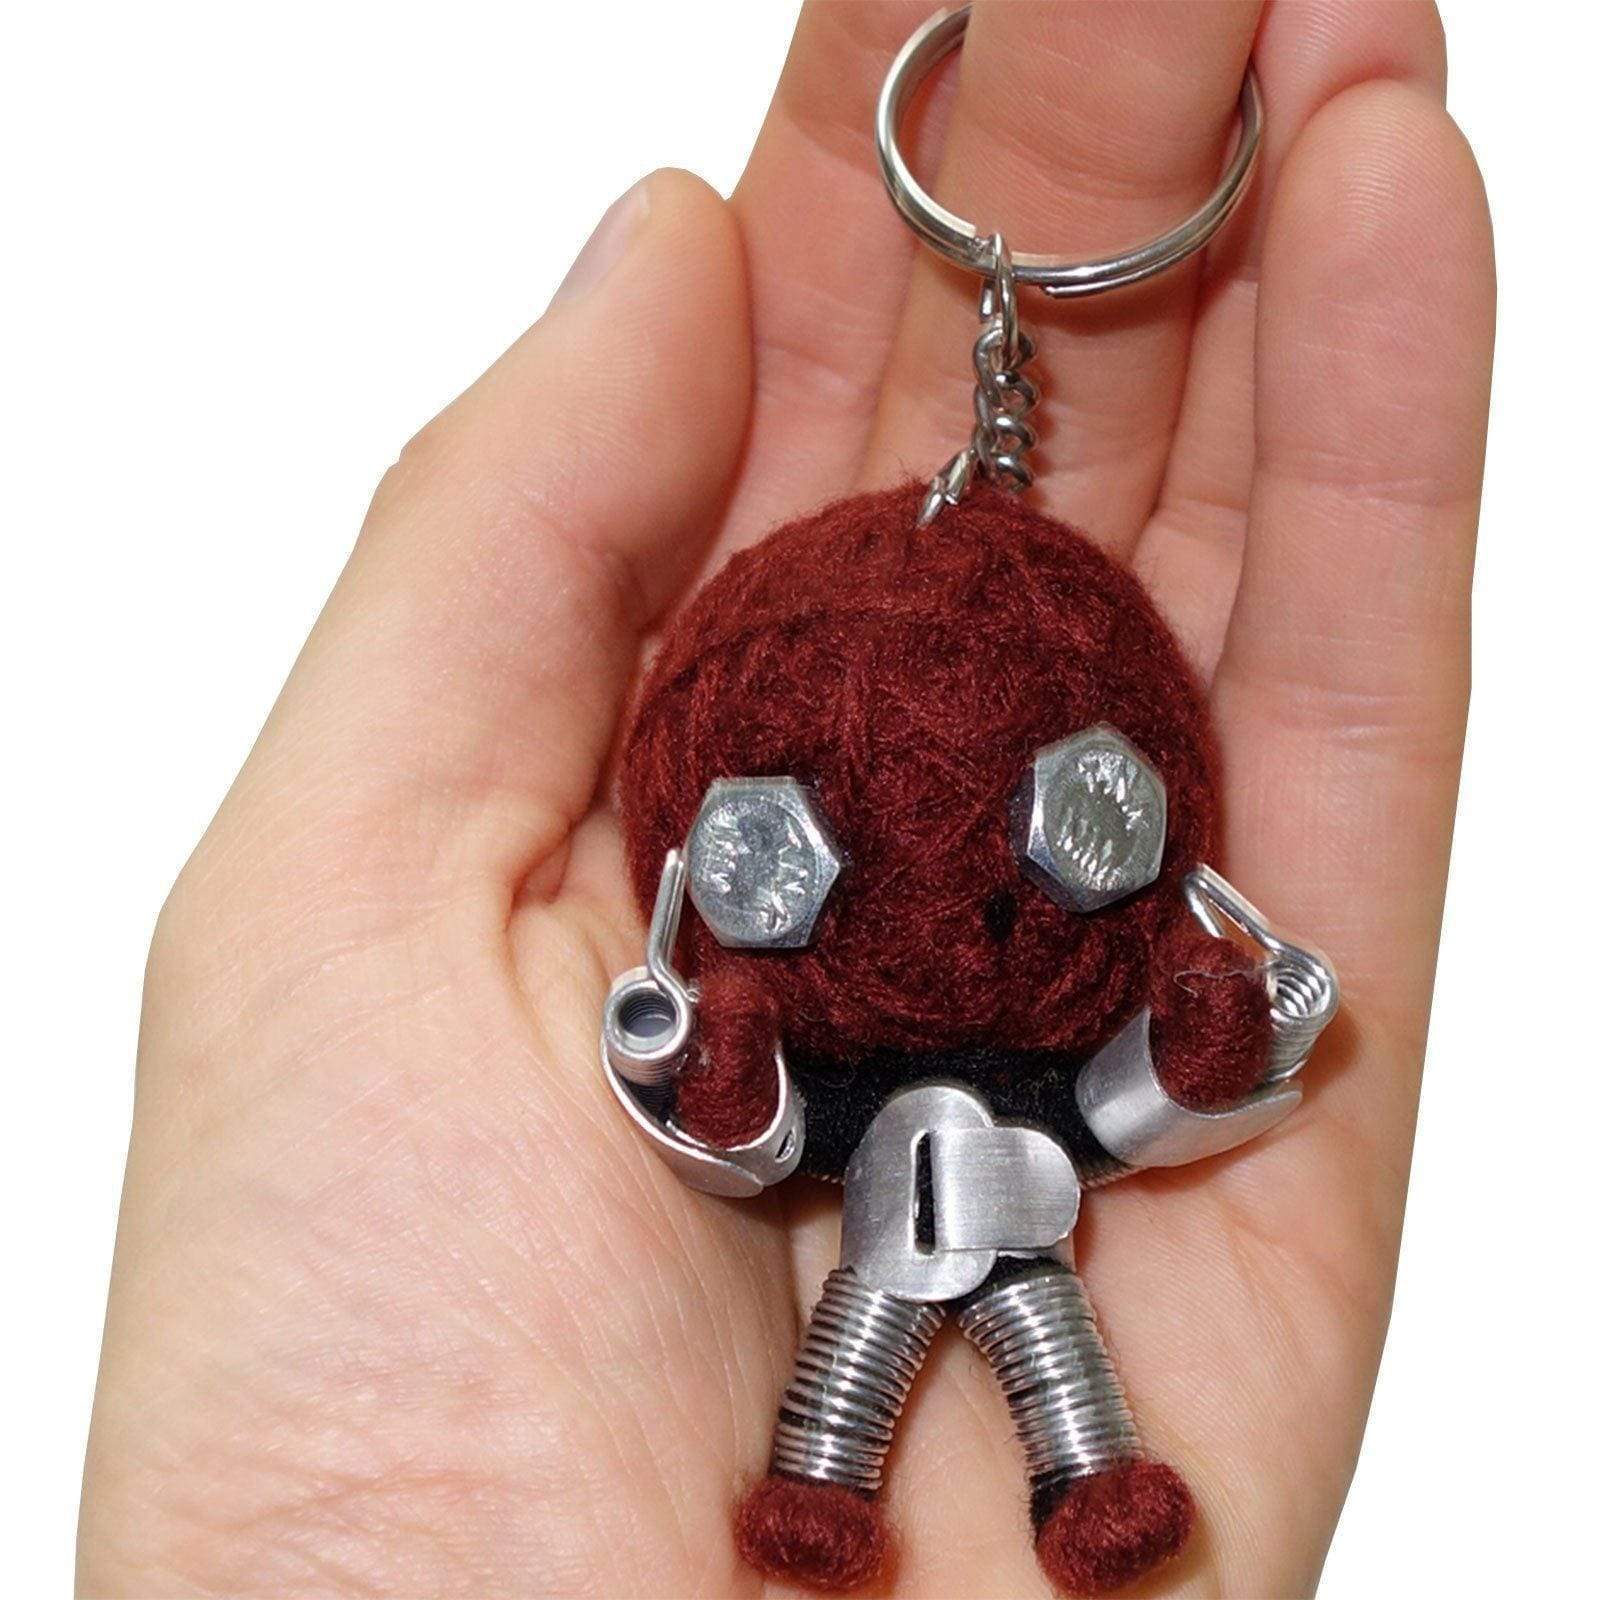 Handmade Recycled Metal Brown Robot String Voodoo Doll Keyring Keychain Toy Gift